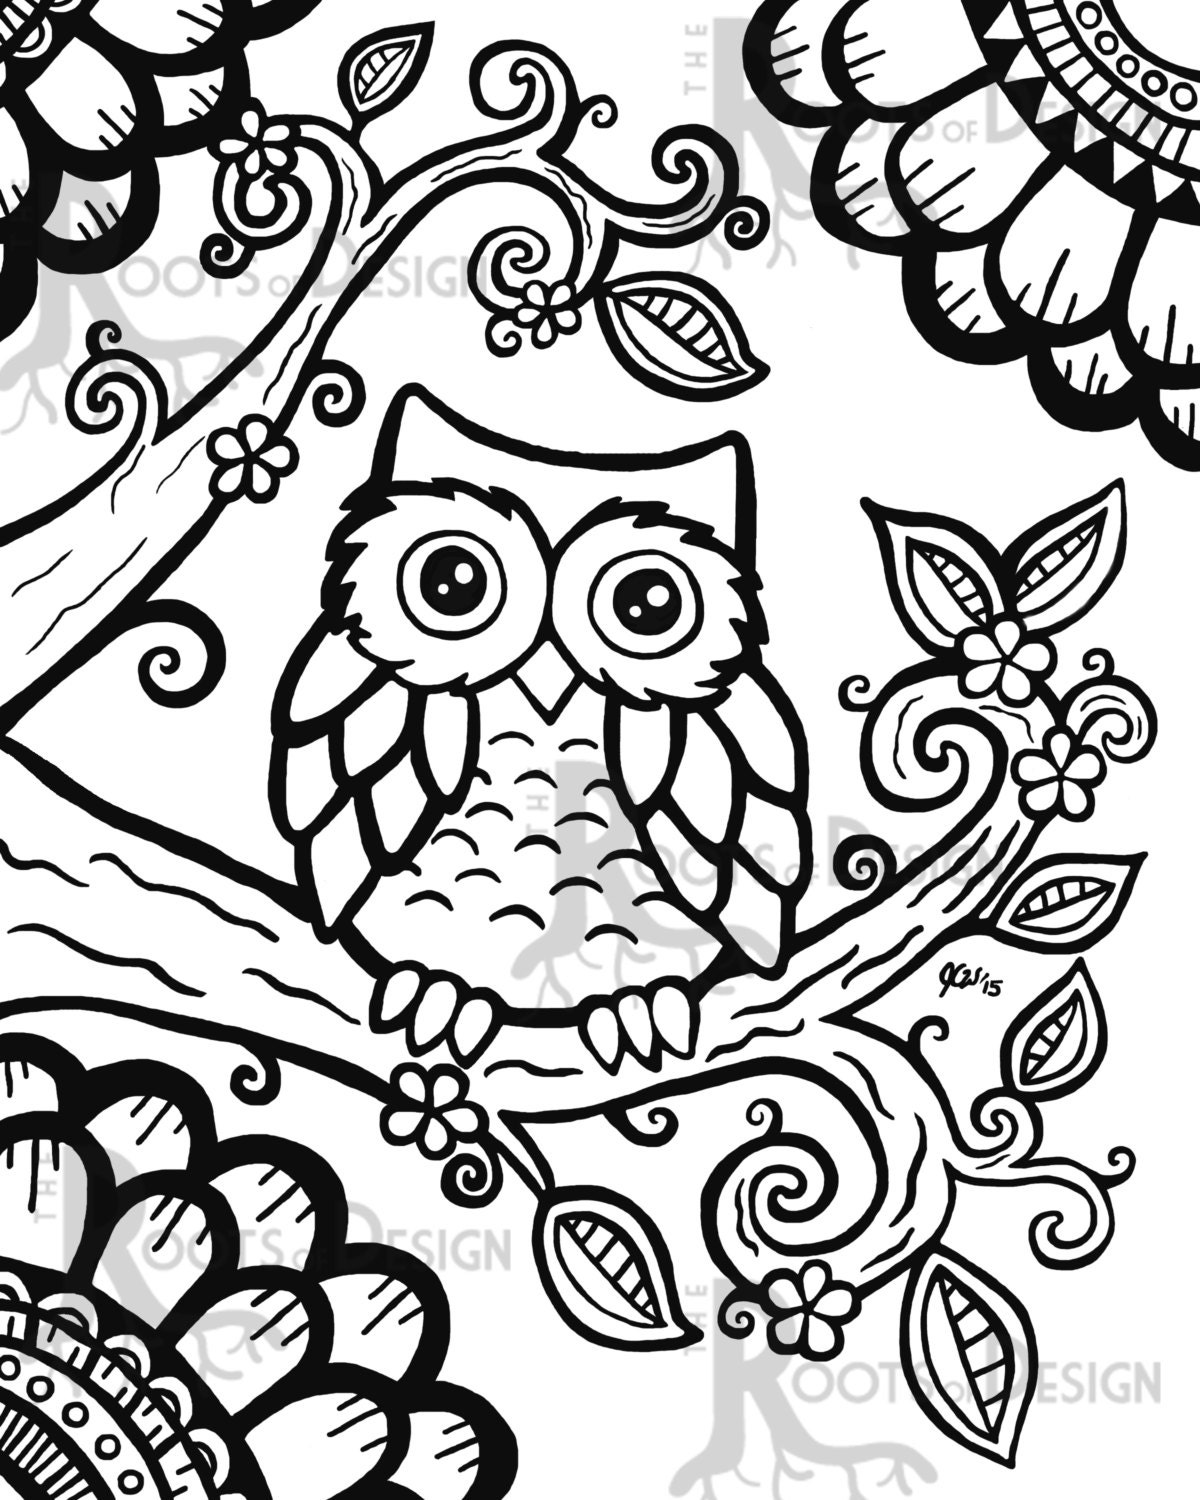 Download INSTANT DOWNLOAD Coloring Page Cute Owl zentangle by ...